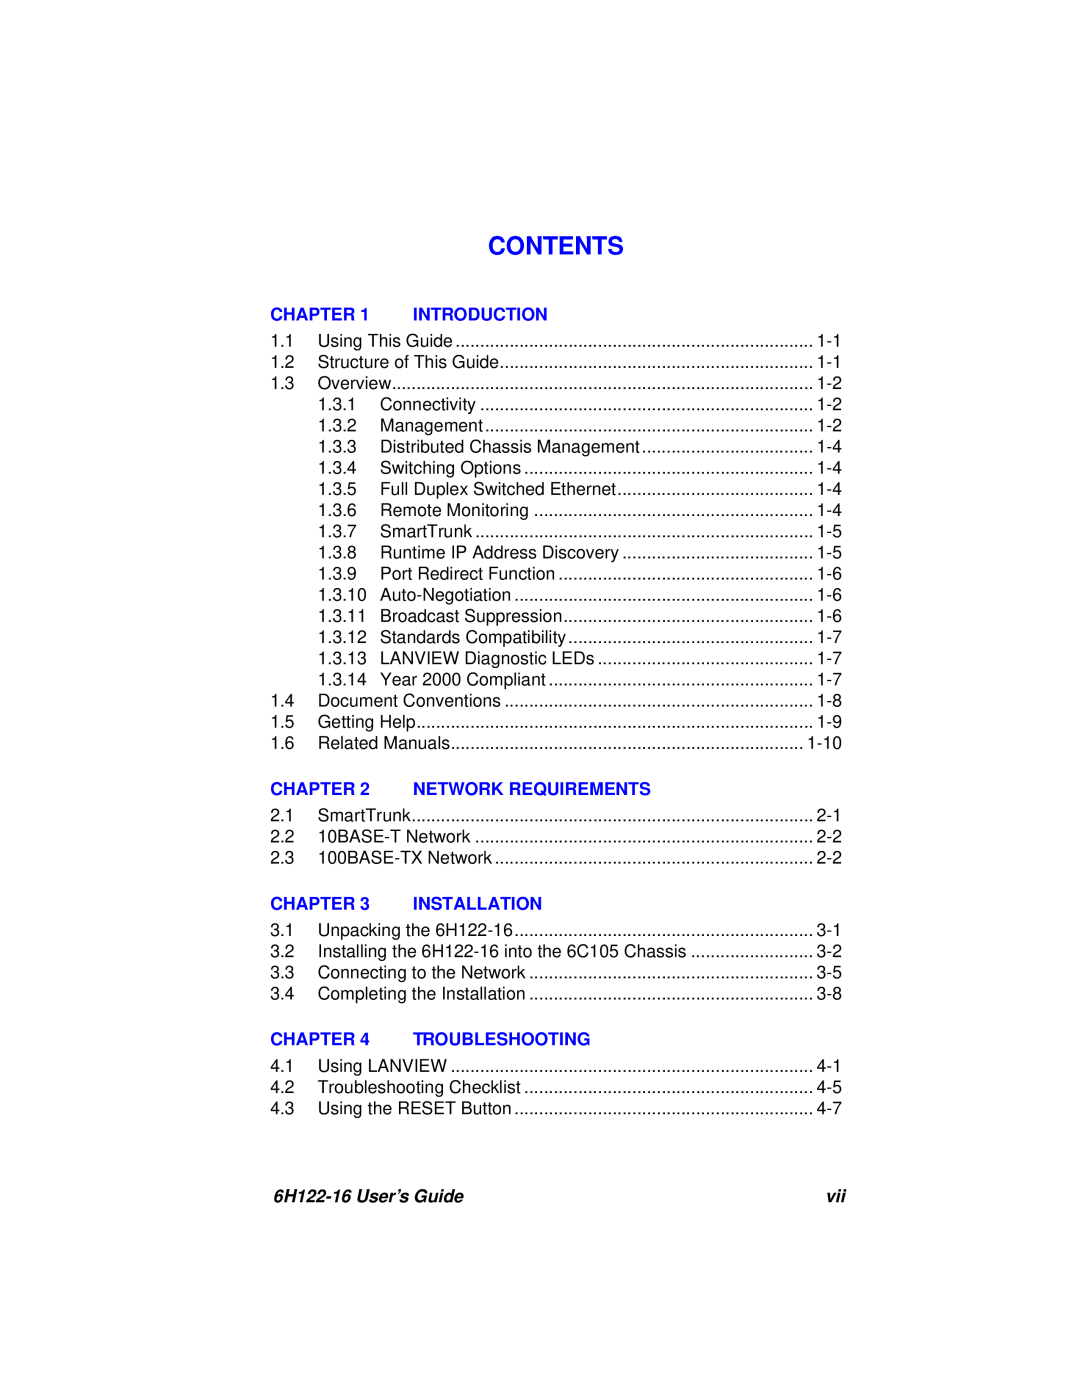 Cabletron Systems 6H122-16 manual Contents, Chapter, Introduction, Network Requirements, Installation, Troubleshooting 